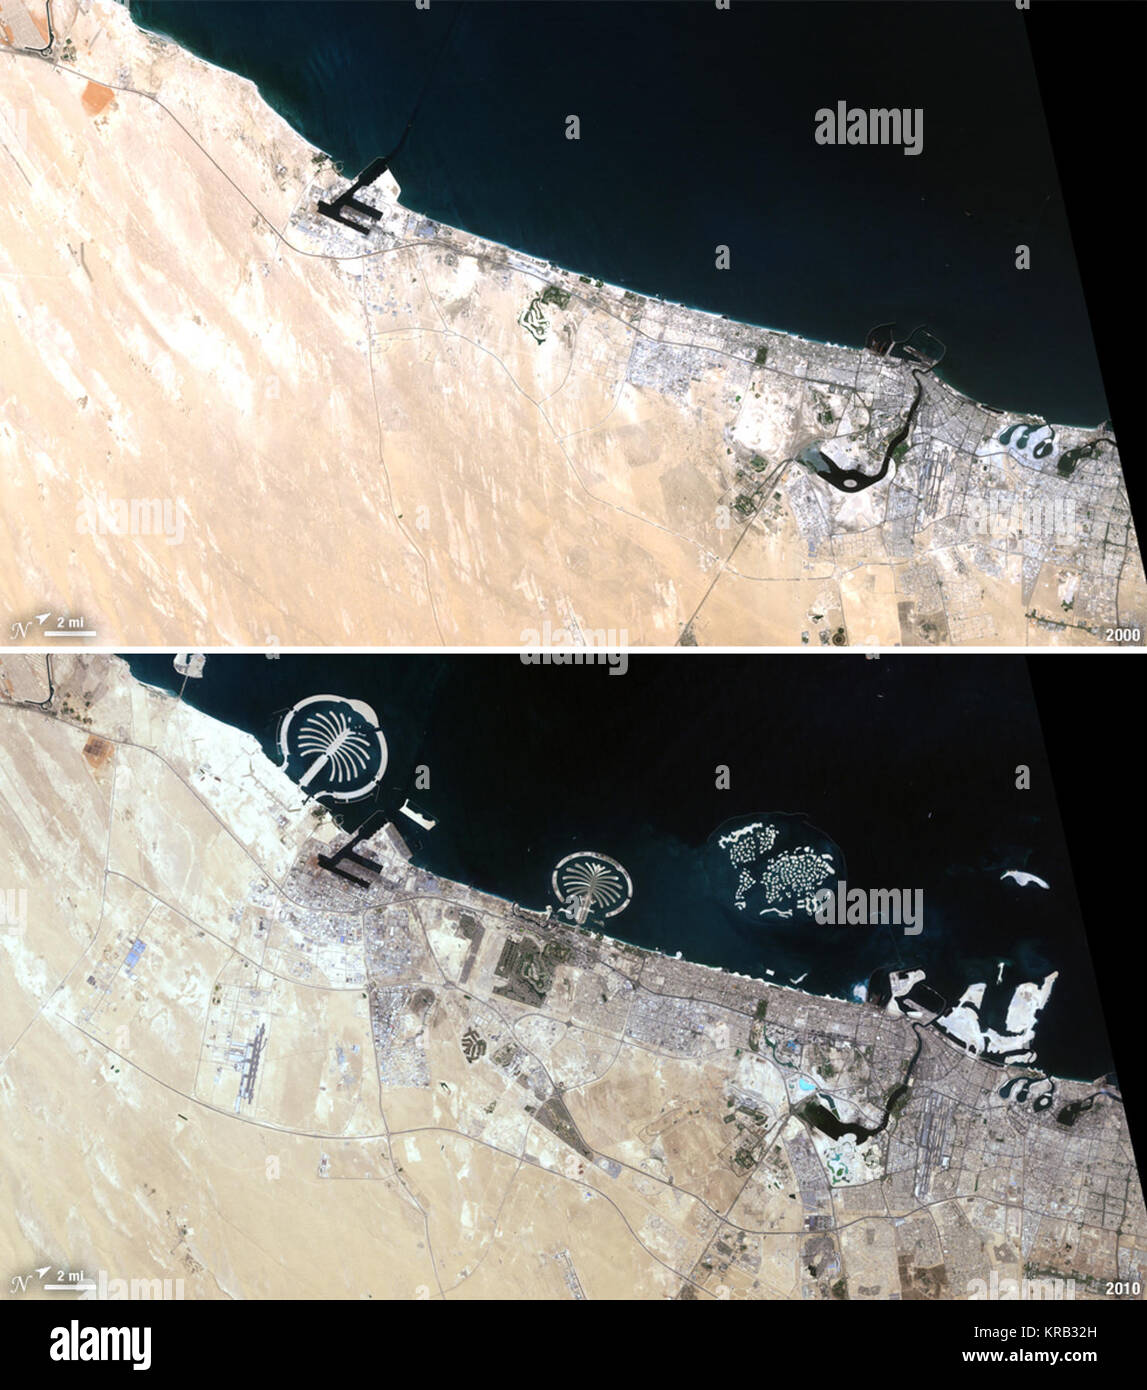 When Landsat 7 imaged Dubai on July 6, 2000, the city was barely visible against the desert landscape. Long straight roads sweep down the coast, and a single harbor juts into the Gulf. Though it seems small in this image, the city was growing quickly as a trade center, oil producer, and member of the United Arab Emirates.  Between 1973 and 2010, Dubai transformed entirely. In this Landsat 7 image, taken on October 6, 2010, dense gray city blocks are surrounded by plant-covered land, which is red. Artificial islands dot the coast. Dubai’s growth is built on tourism, trade, and oil.  ----  NASA  Stock Photo